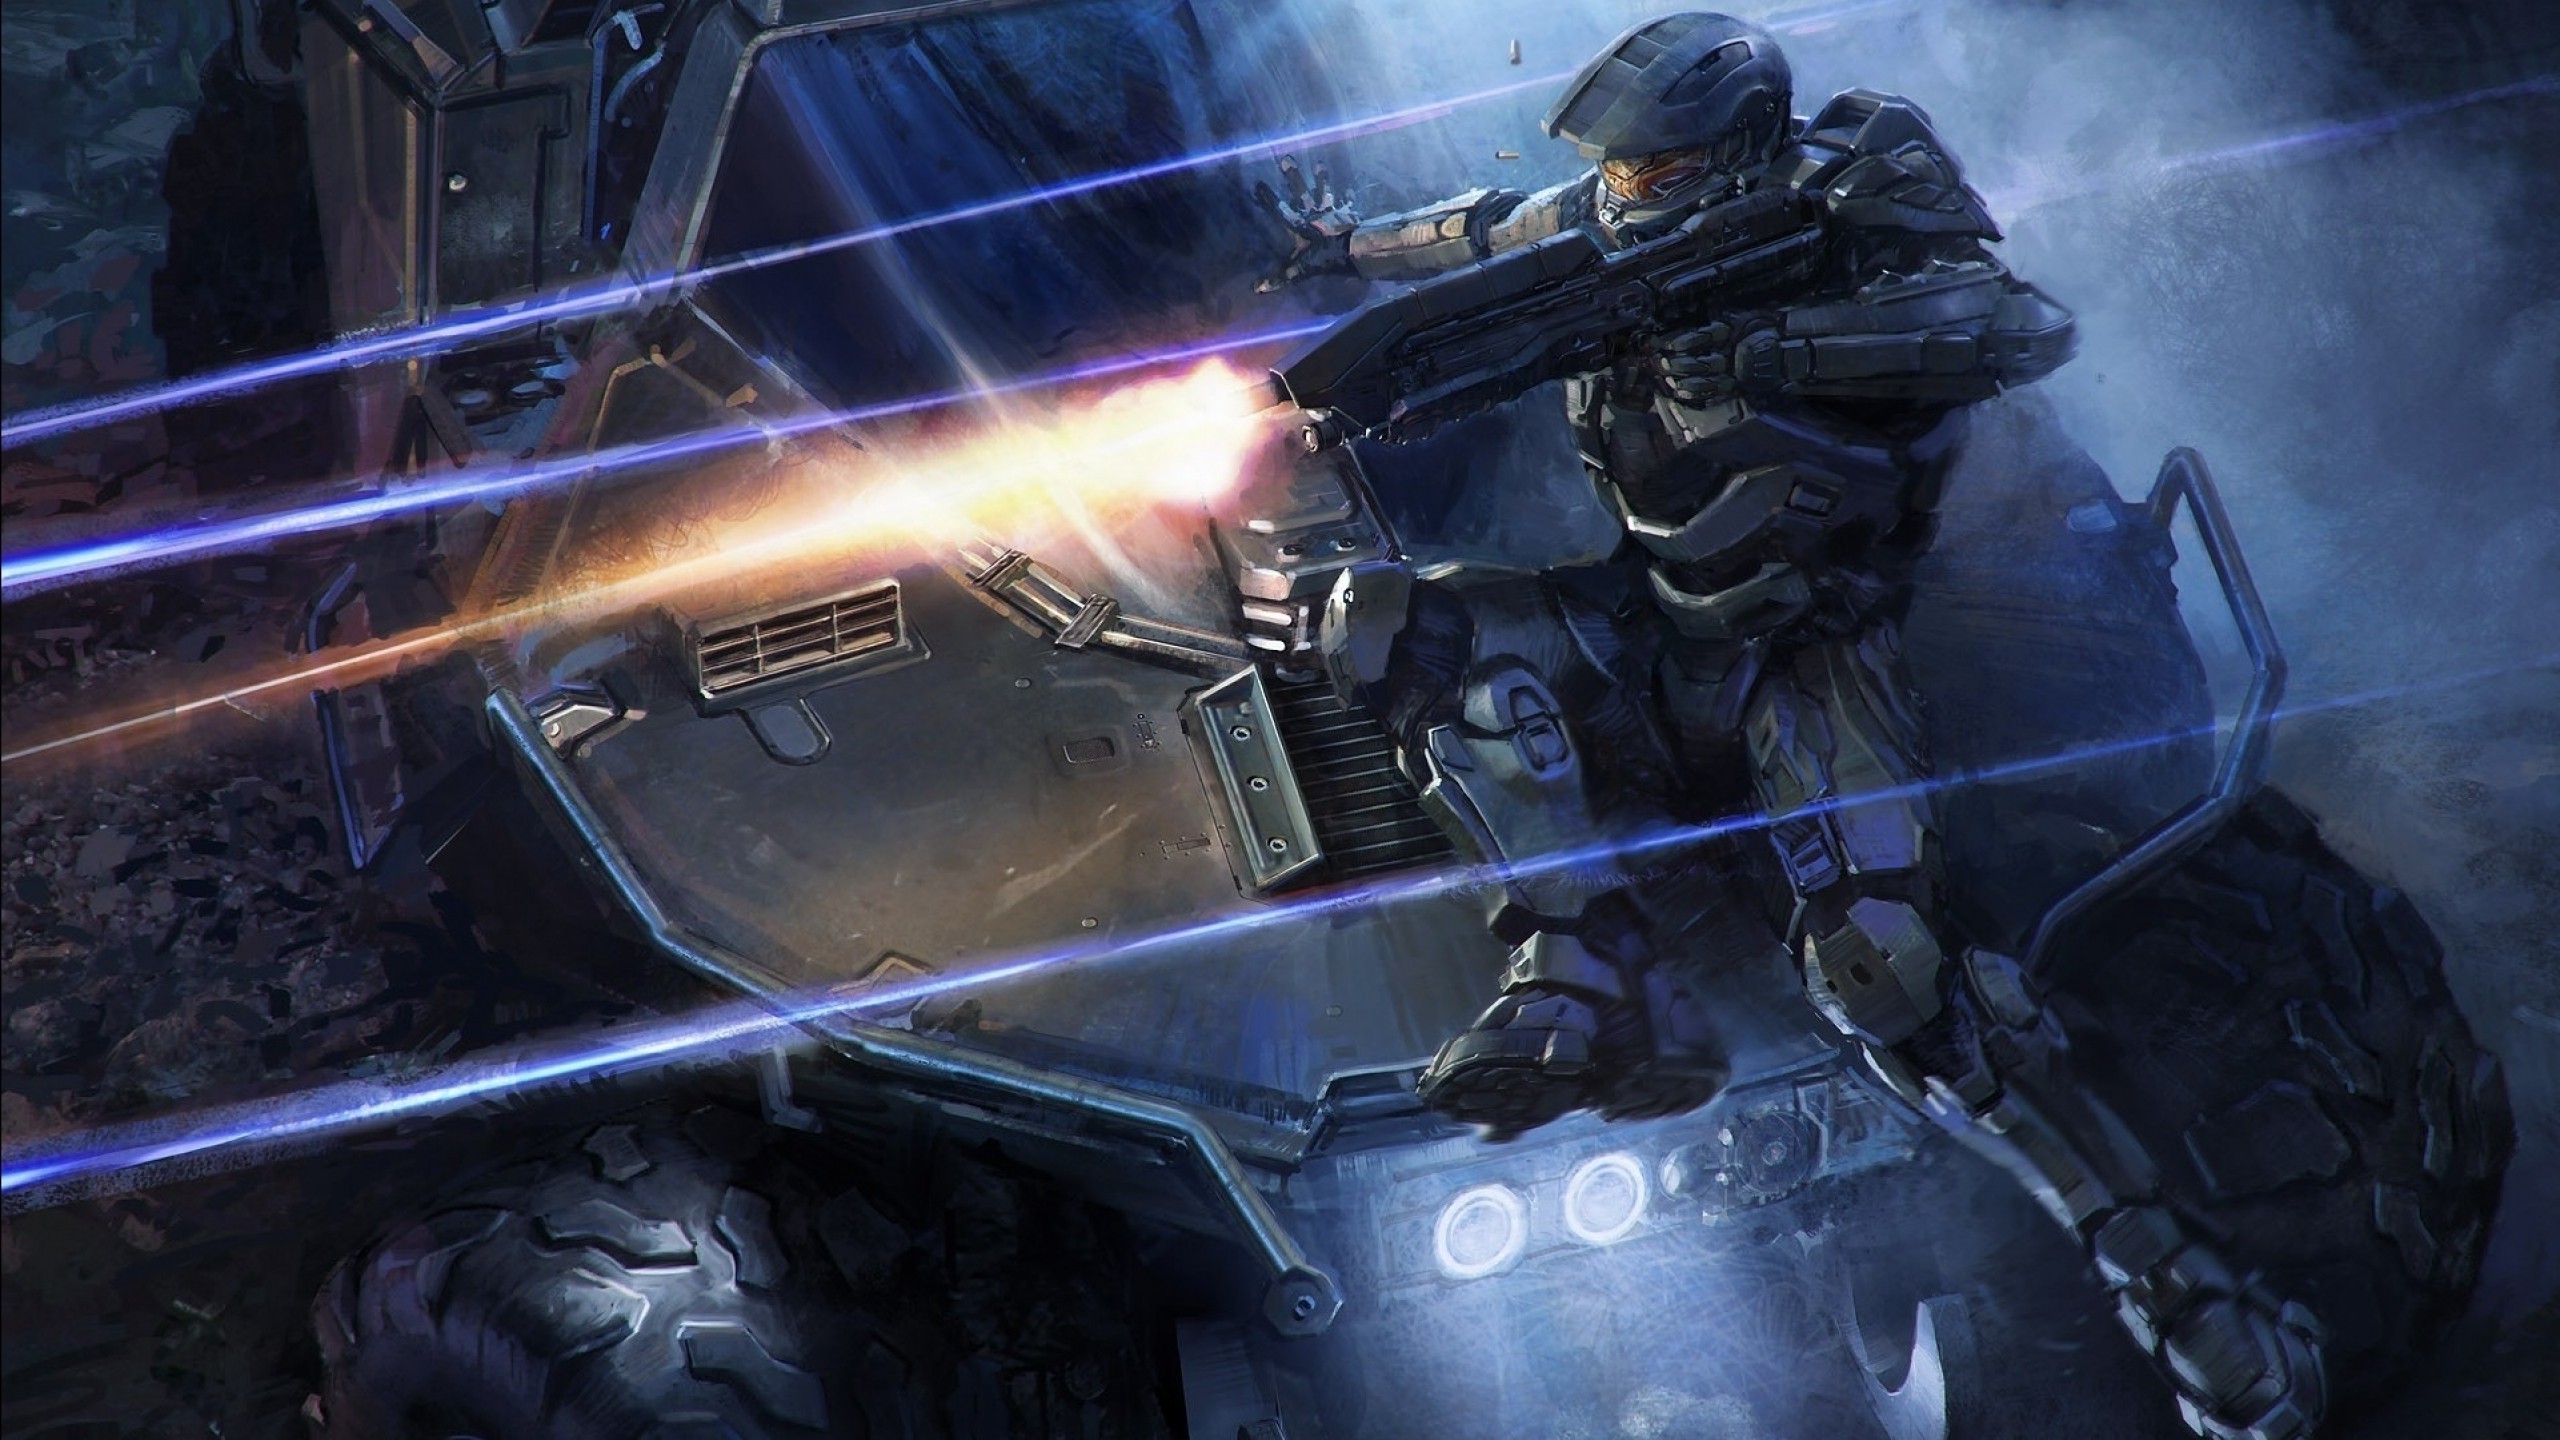 2560x1440  Halo, Master Chief, Halo 4, Xbox One, Halo: Master Chief  Collection, Video Games, Digital Art Wallpapers HD / Desktop and Mobile  Backgrounds